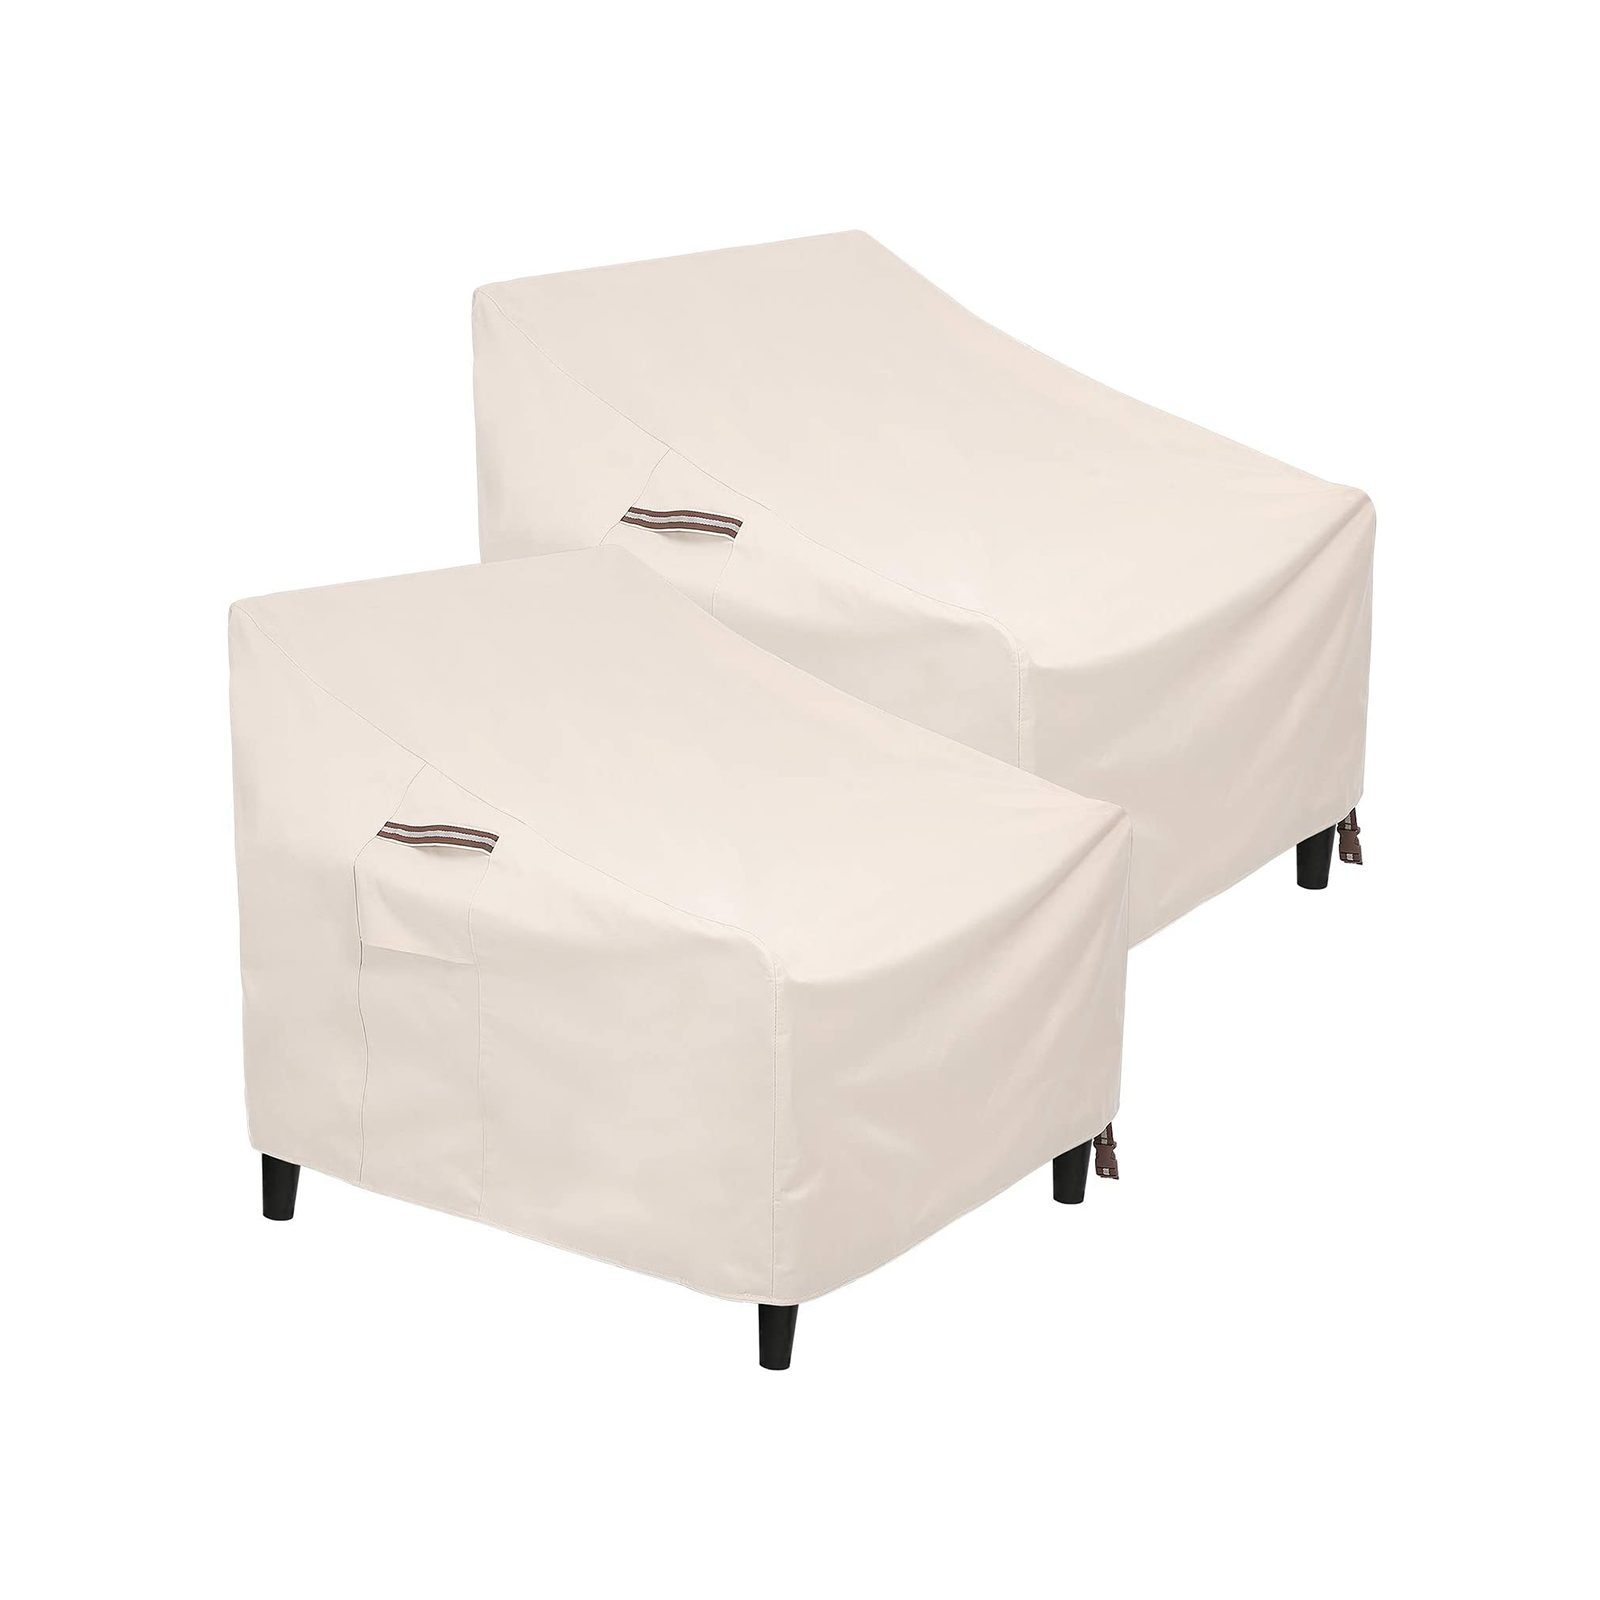 Patio Chair Covers 2 Pack 600D Waterproof and Heavy Duty Outdoor Furniture Covers Lounge Deep Seat Cover 